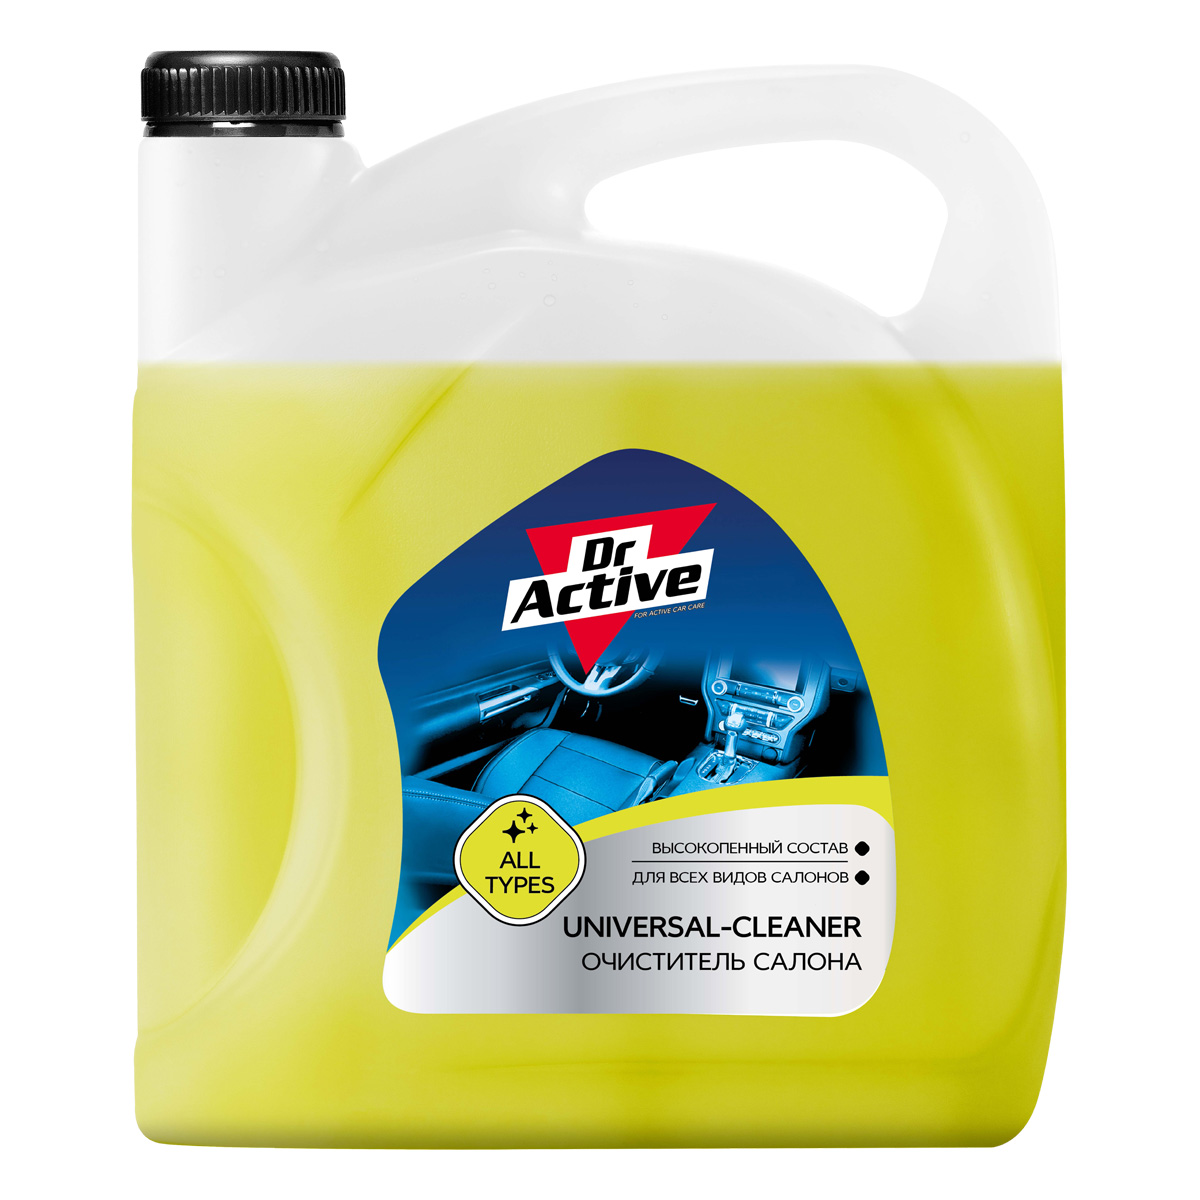 Universal-cleaner